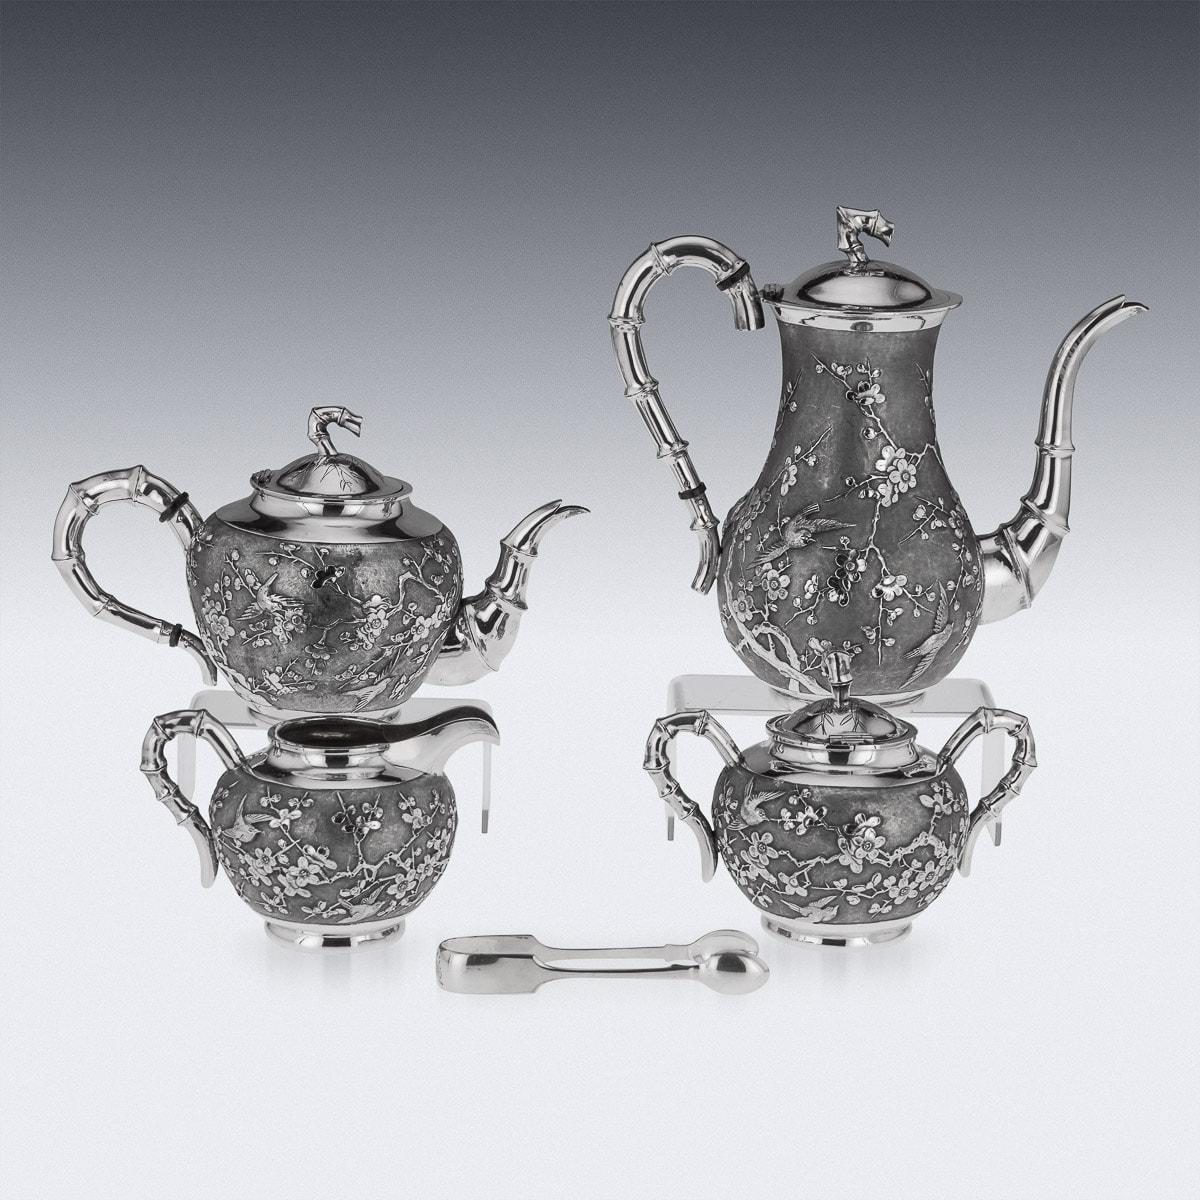 20th Century Chinese Solid Silver Cherry Blossom Tea Set, Siu Kee, circa 1900 In Good Condition For Sale In Royal Tunbridge Wells, Kent